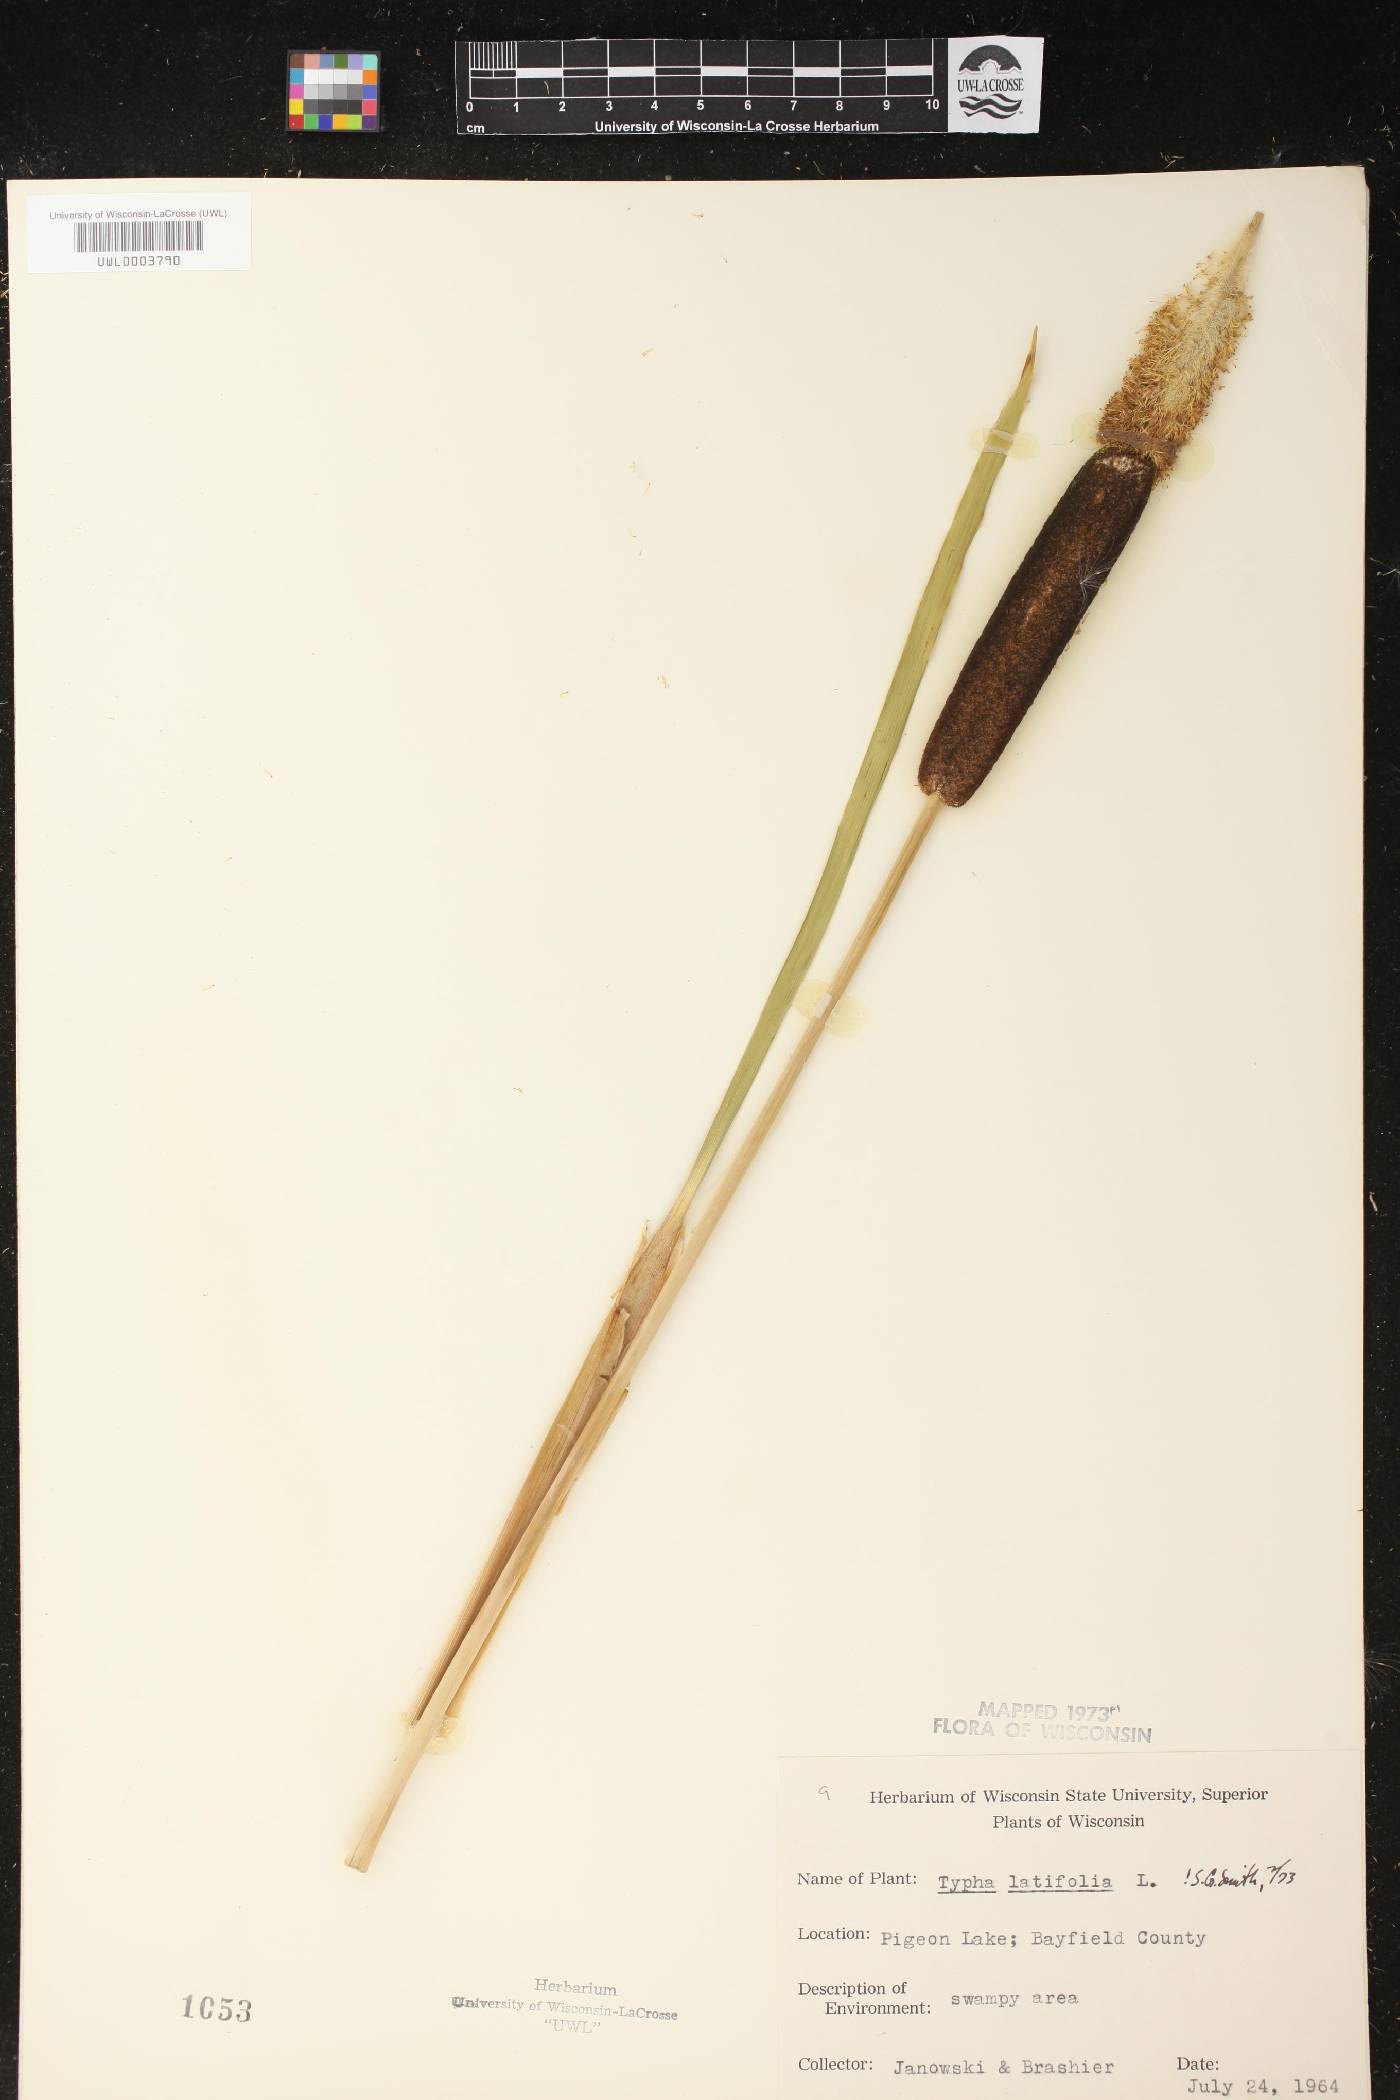 Cattail specimen from Bayfield County from July 24, 1964.